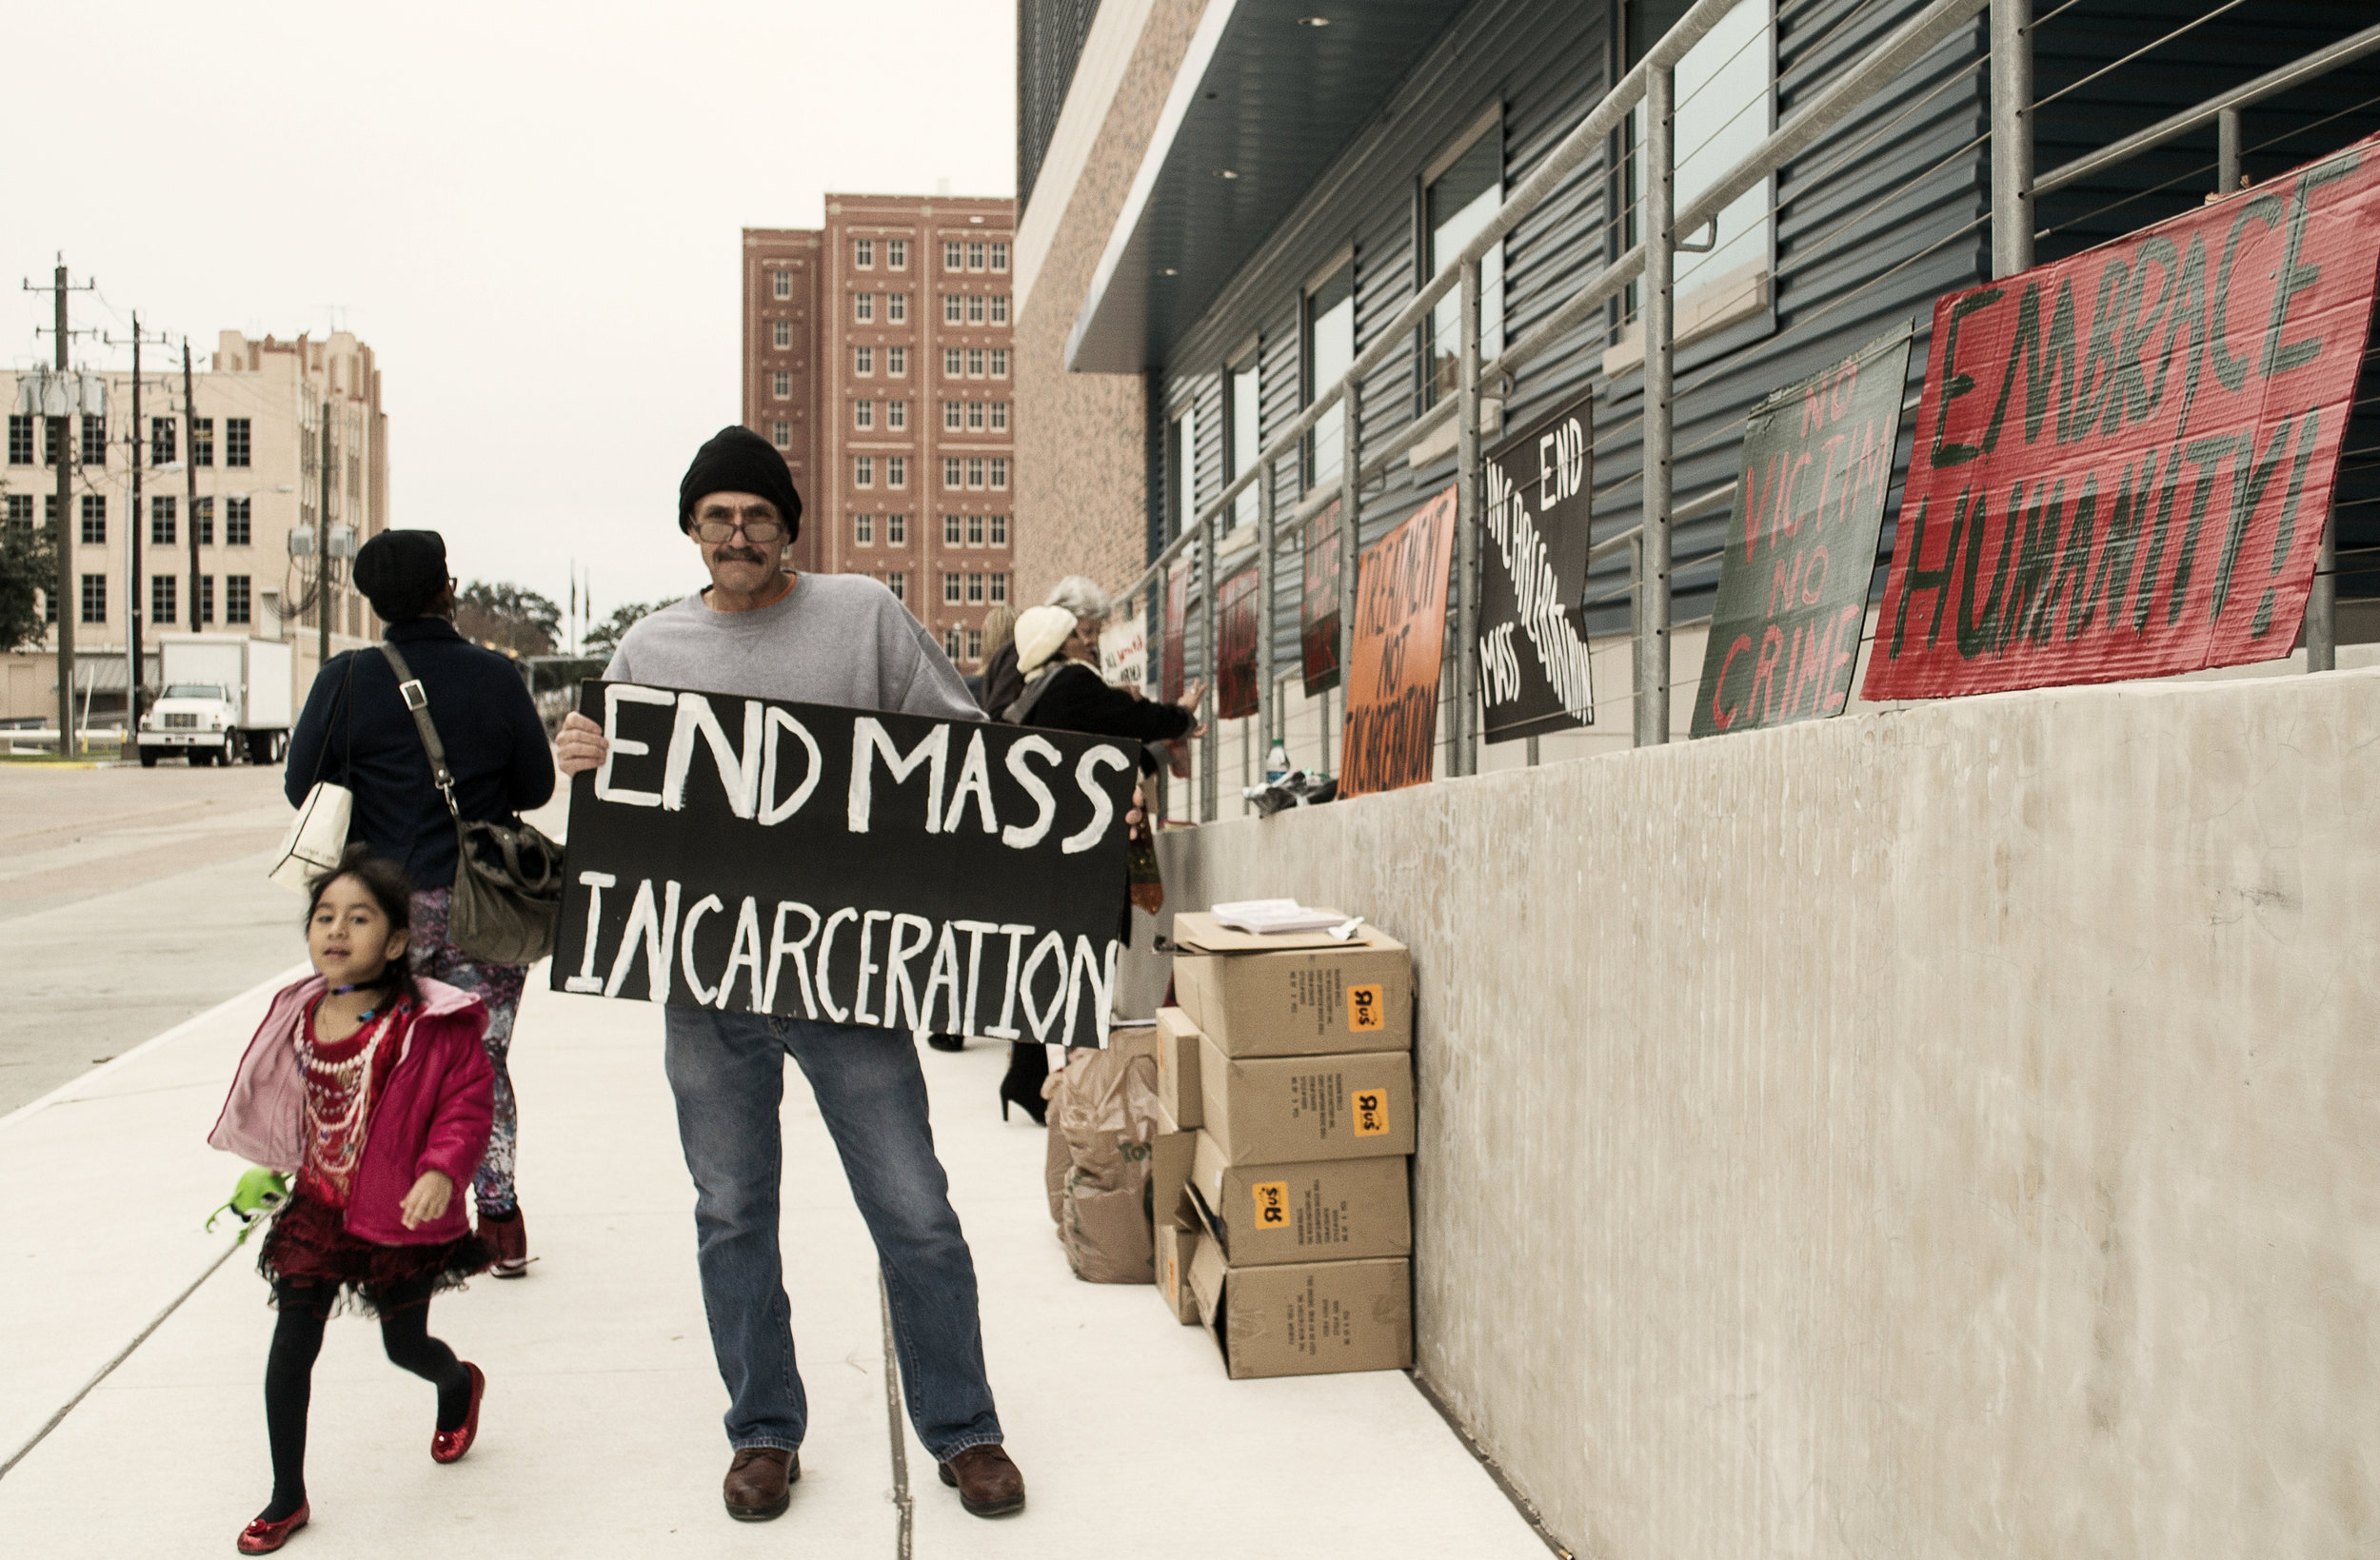 Christmas Day End Mass Incarceration Protest (2013)